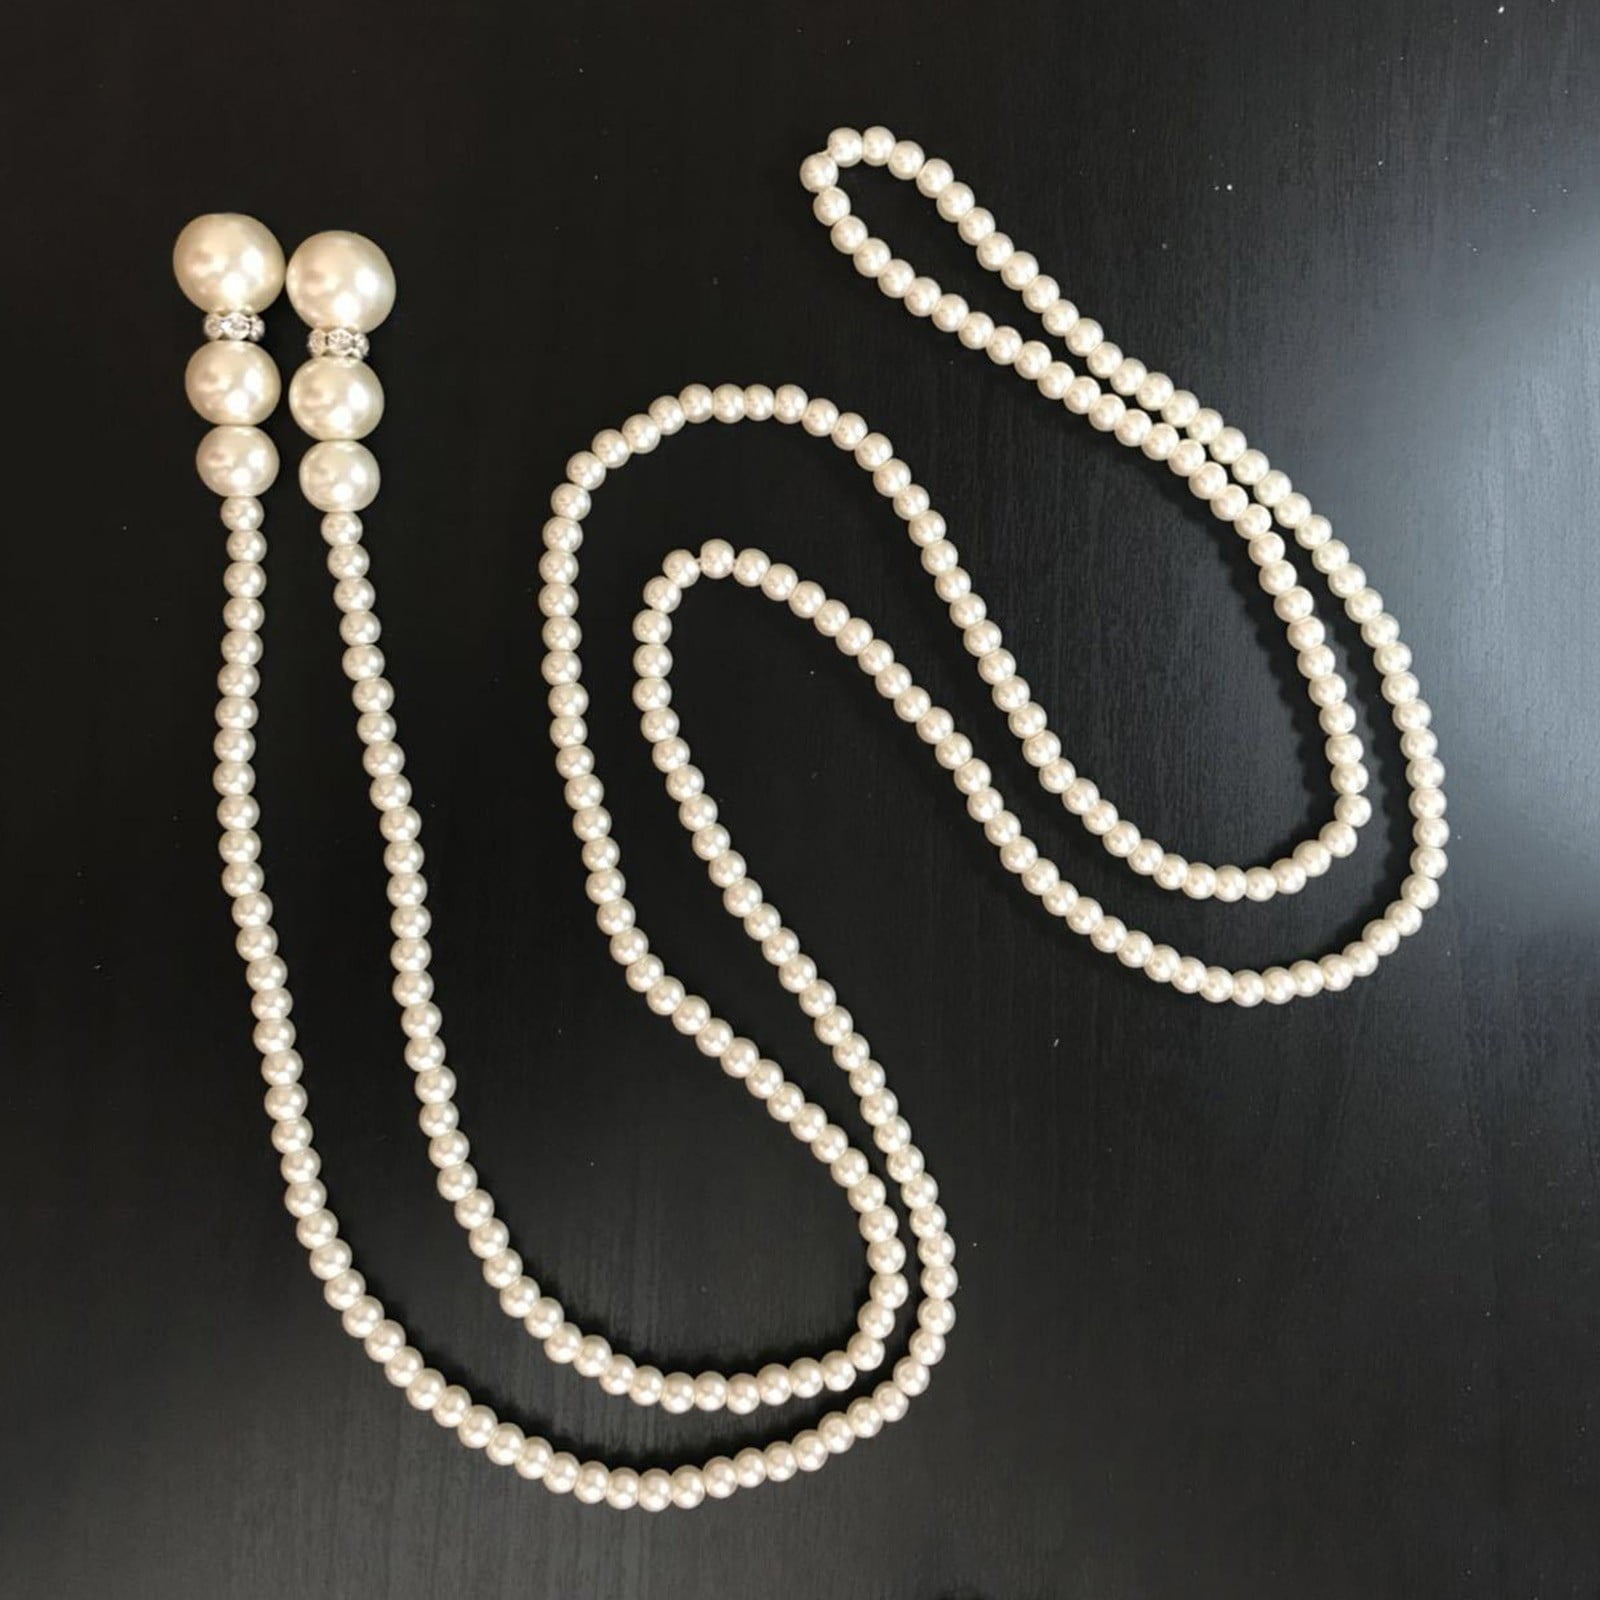 zttd 1920s pearls necklace fashion pearls gatsby accessories 